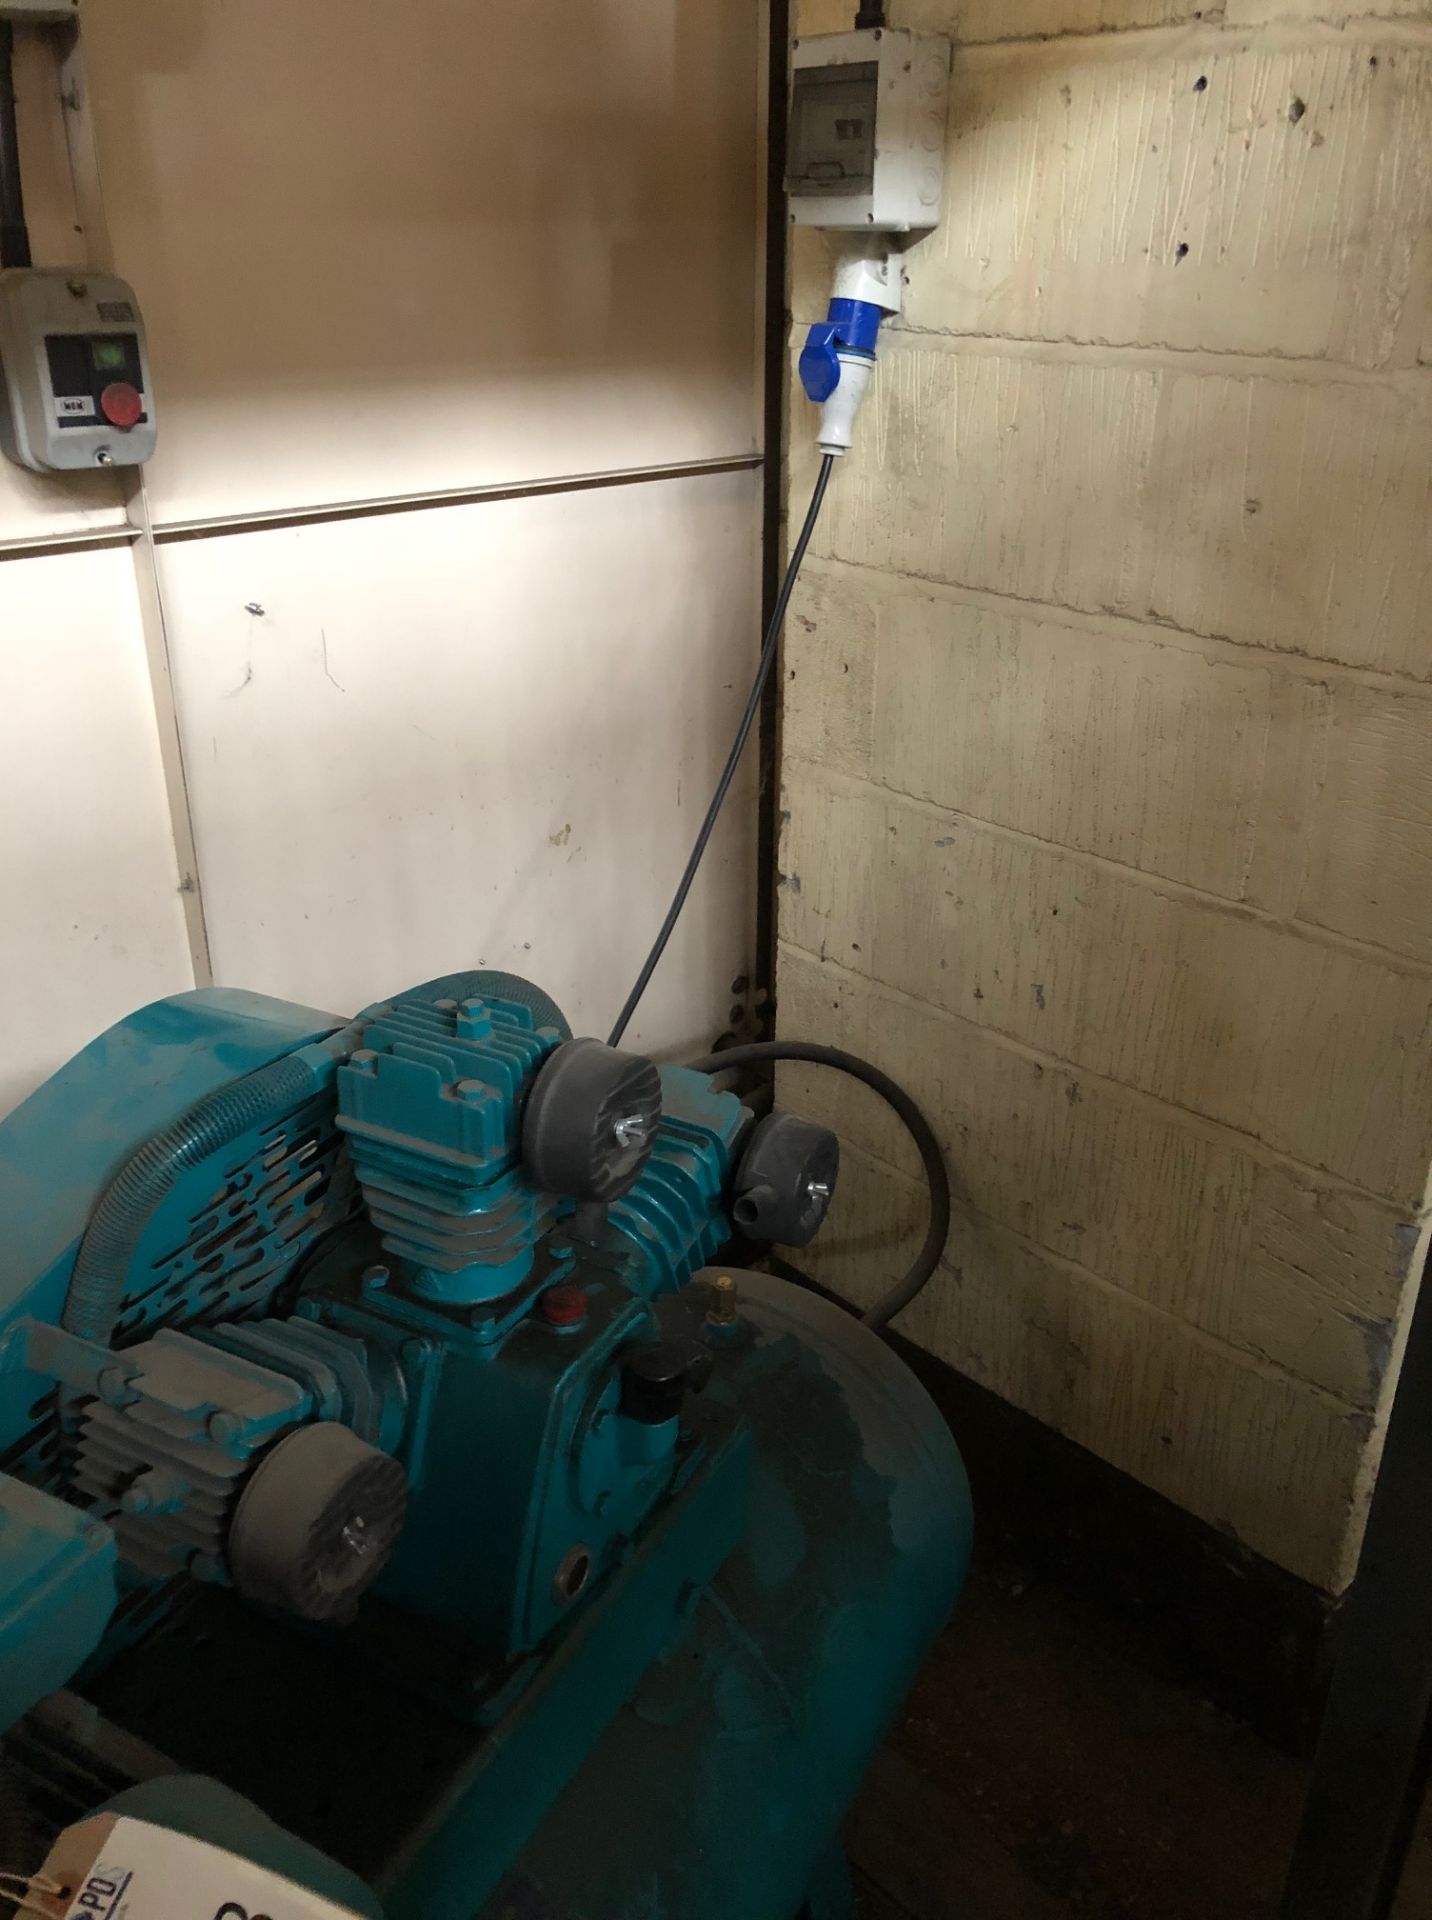 CMG Receiver Mounted Compressor (Single Phase) with Vertical Air Compressor (Collection Tuesday - Image 3 of 3